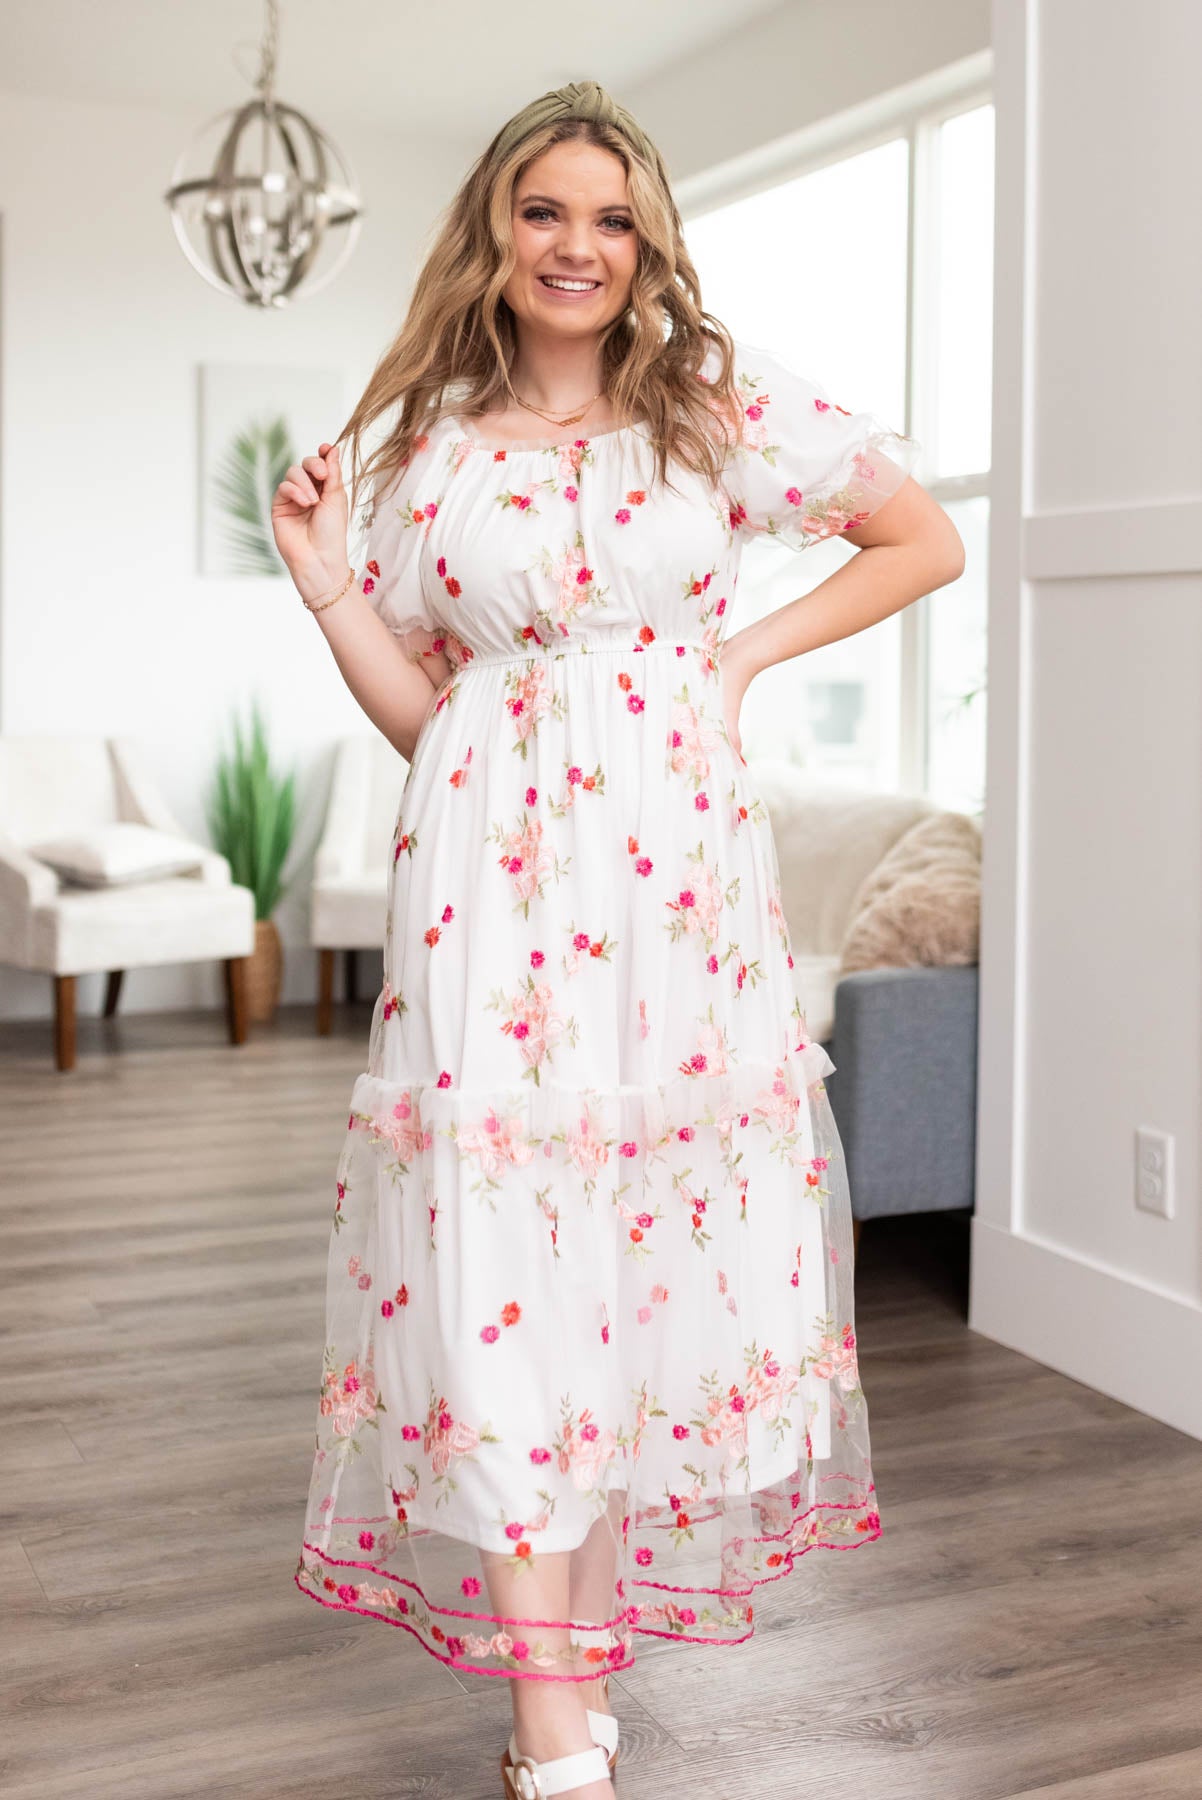 Short sleeve white embroidered floral dress